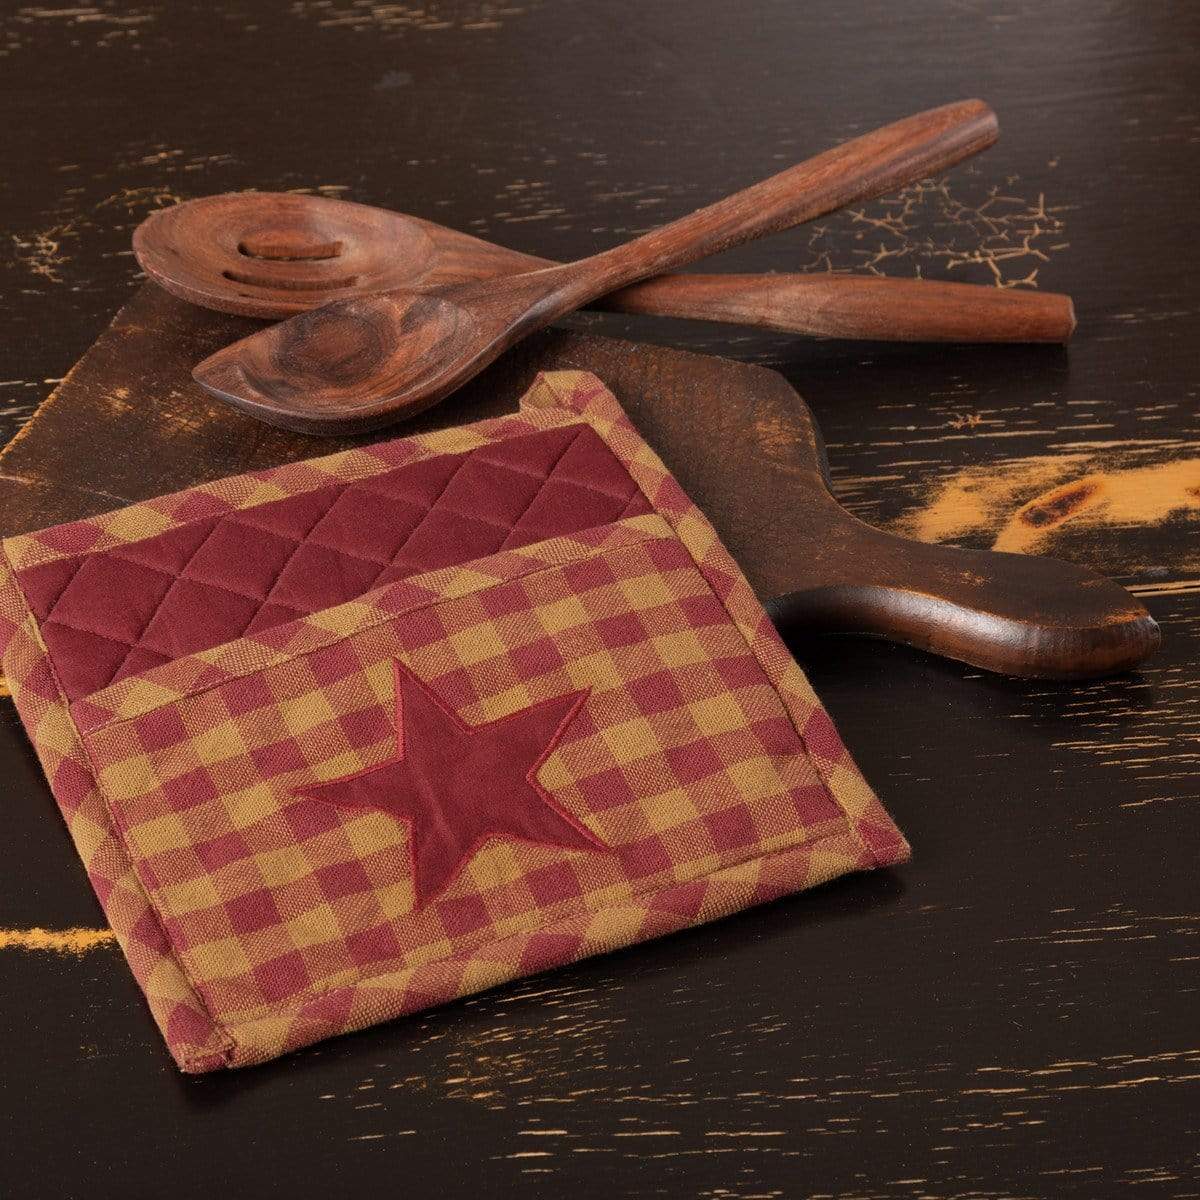 Get The Best Rustic Oven Mitts & Rustic Pot Holders